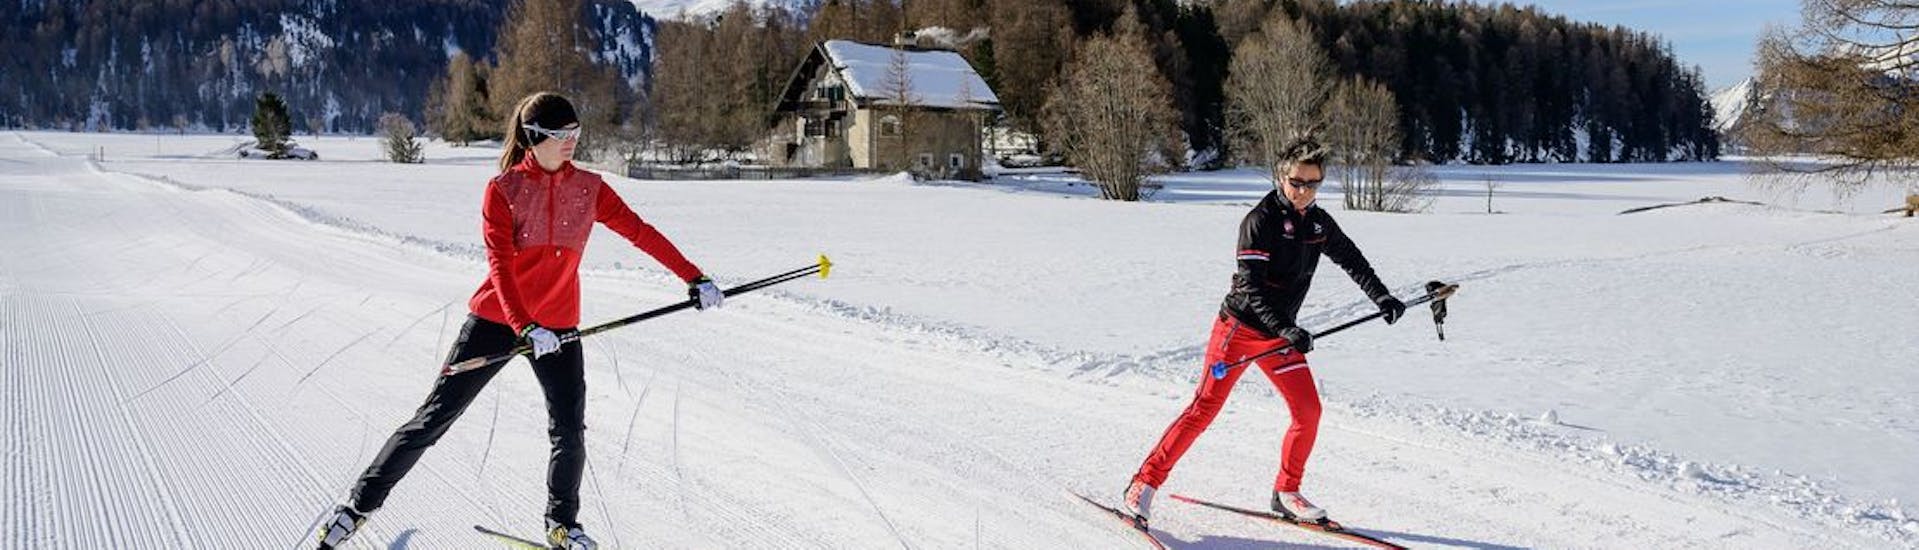 A cross-country skier is learning the classic technique during private cross-country skiing lessons with Swiss Ski School St. Moritz the Red Legends.